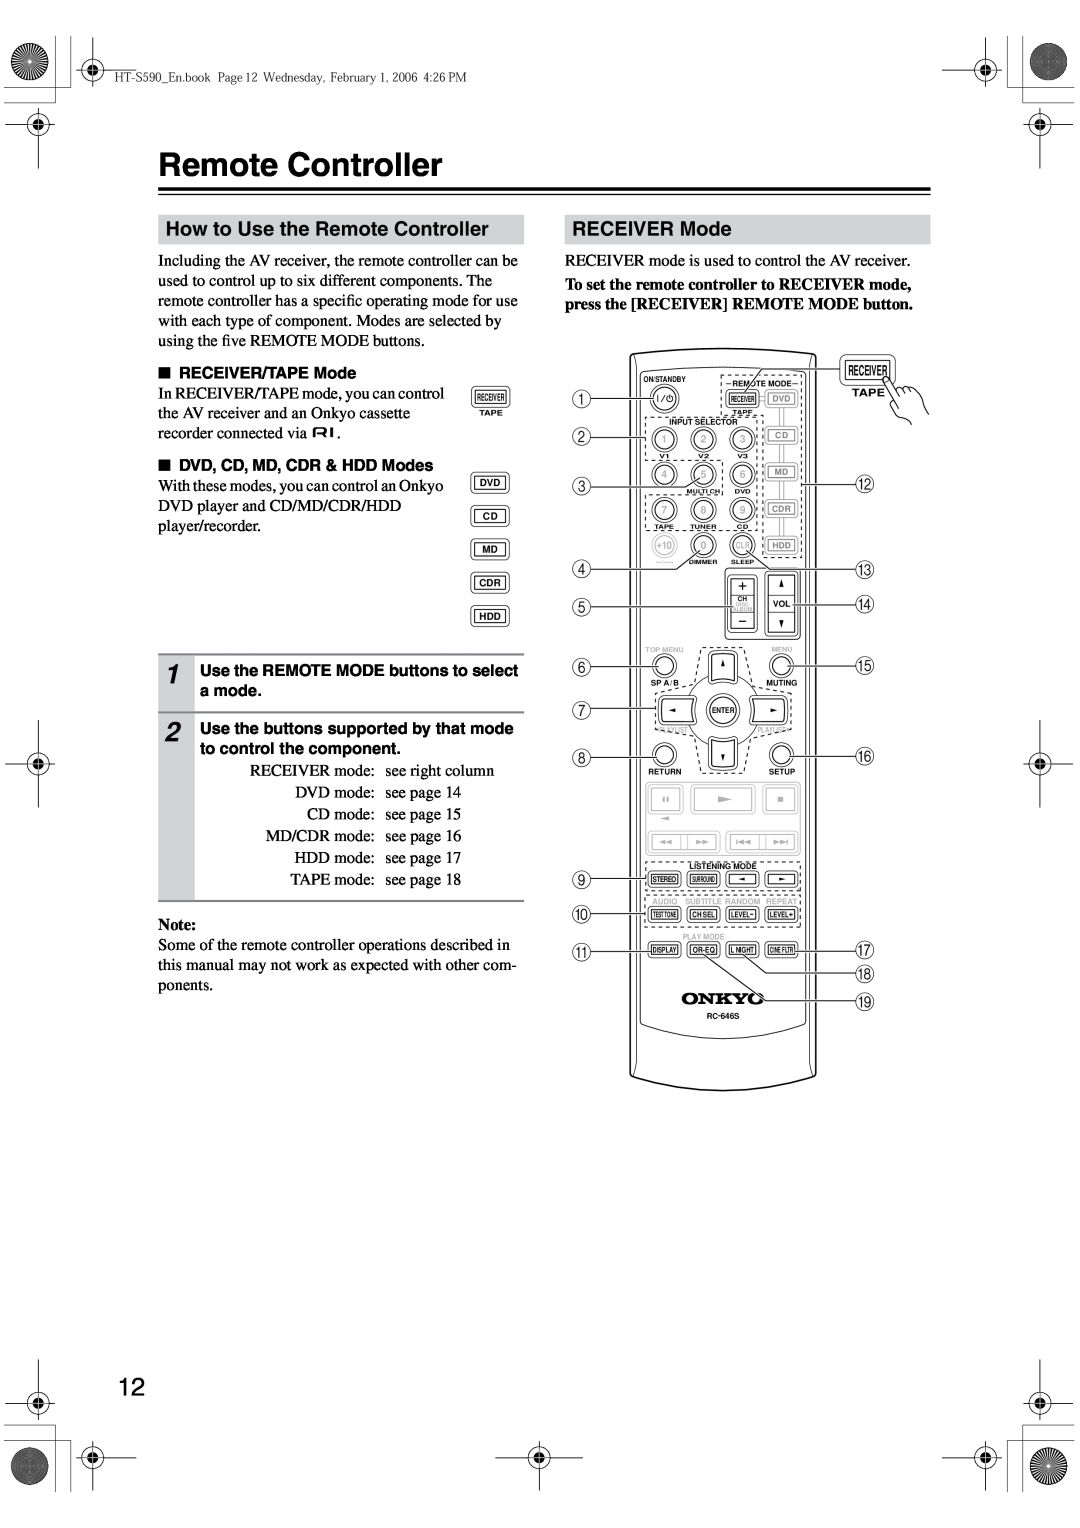 Onkyo SKC-340C, SKF-340F, SKM-340S, SKW-340 instruction manual How to Use the Remote Controller, RECEIVER Mode 